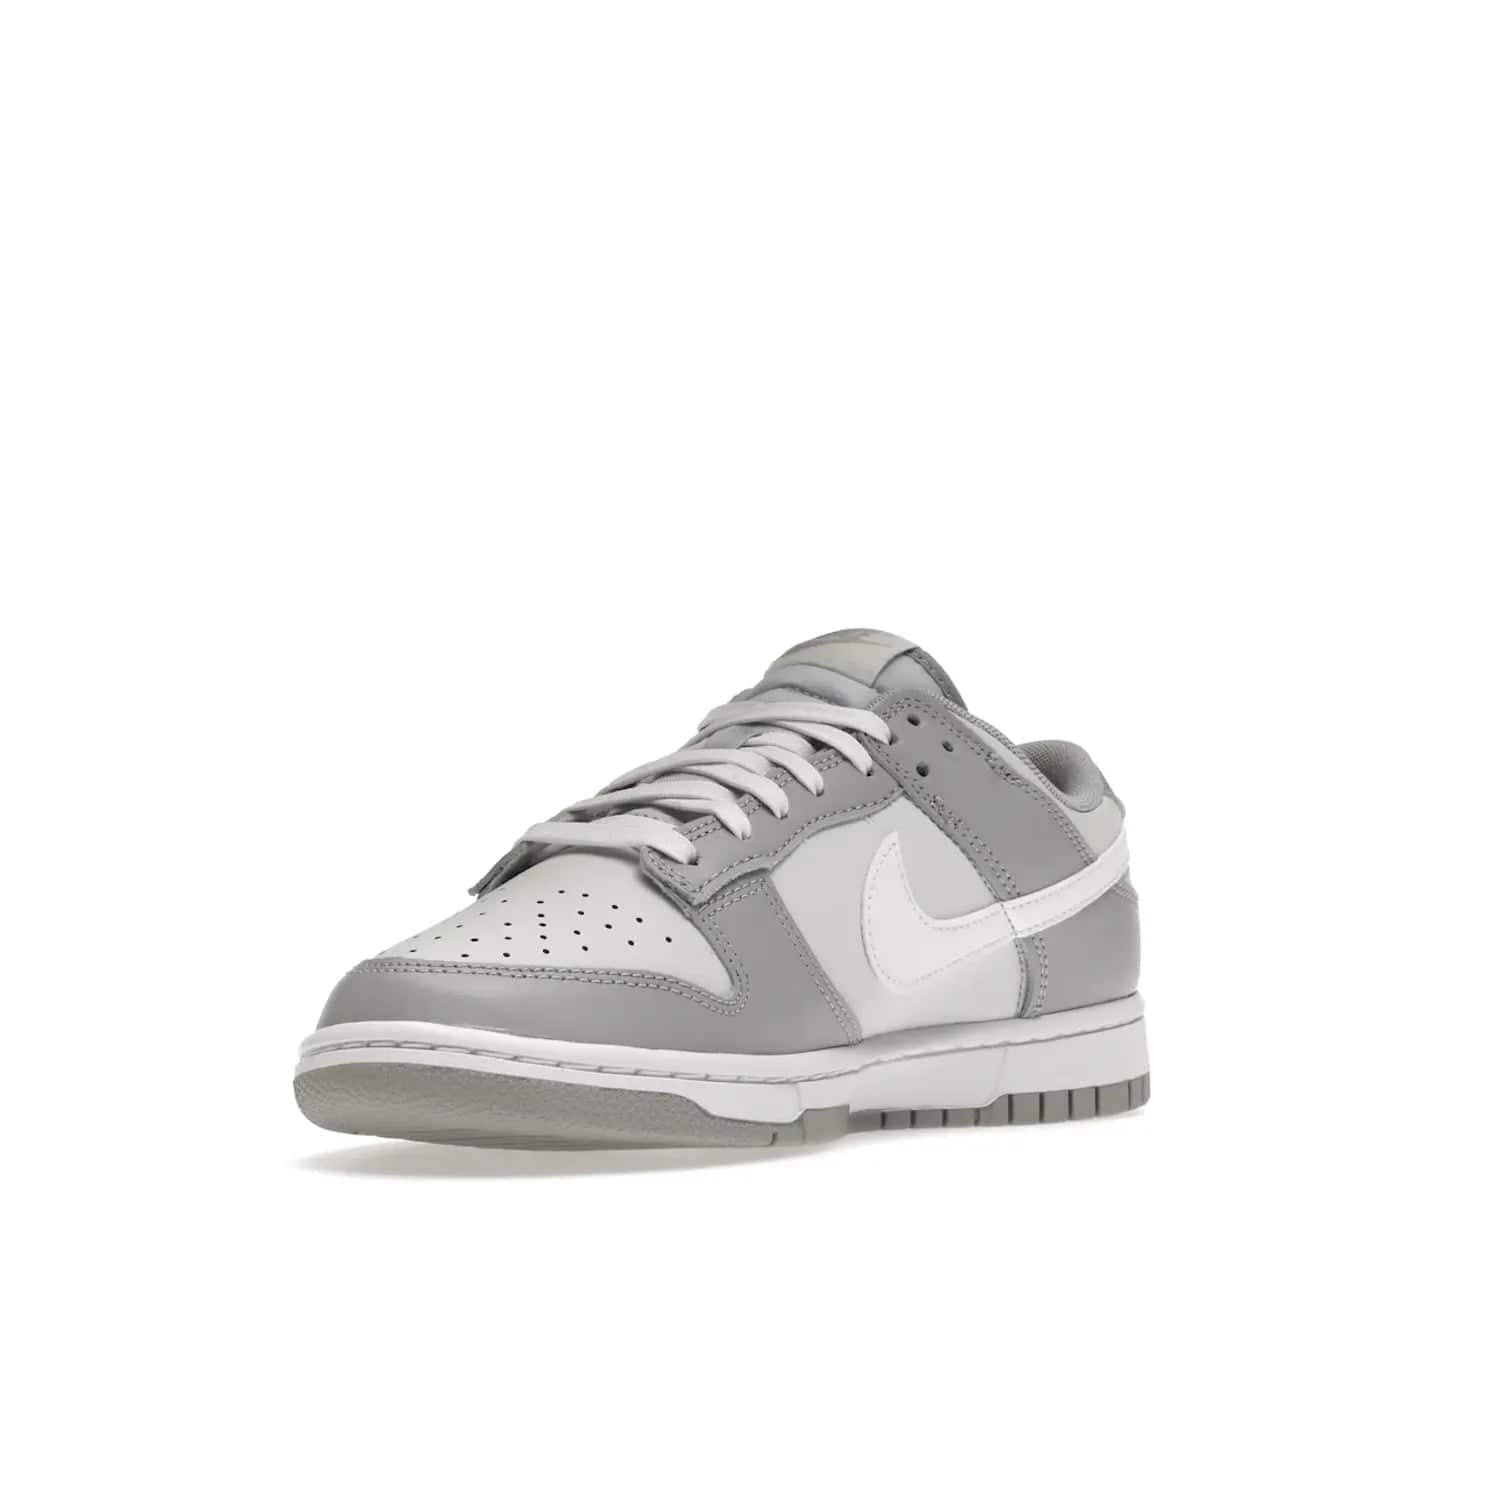 Nike Dunk Low Two Tone Grey - Image 14 - Only at www.BallersClubKickz.com - Fresh Nike Dunk Low Two Tone Grey leather/overlay Sneaker. White Swoosh detailing, nylon tongue, woven label and Air Sole. Get yours and stay on the trend.